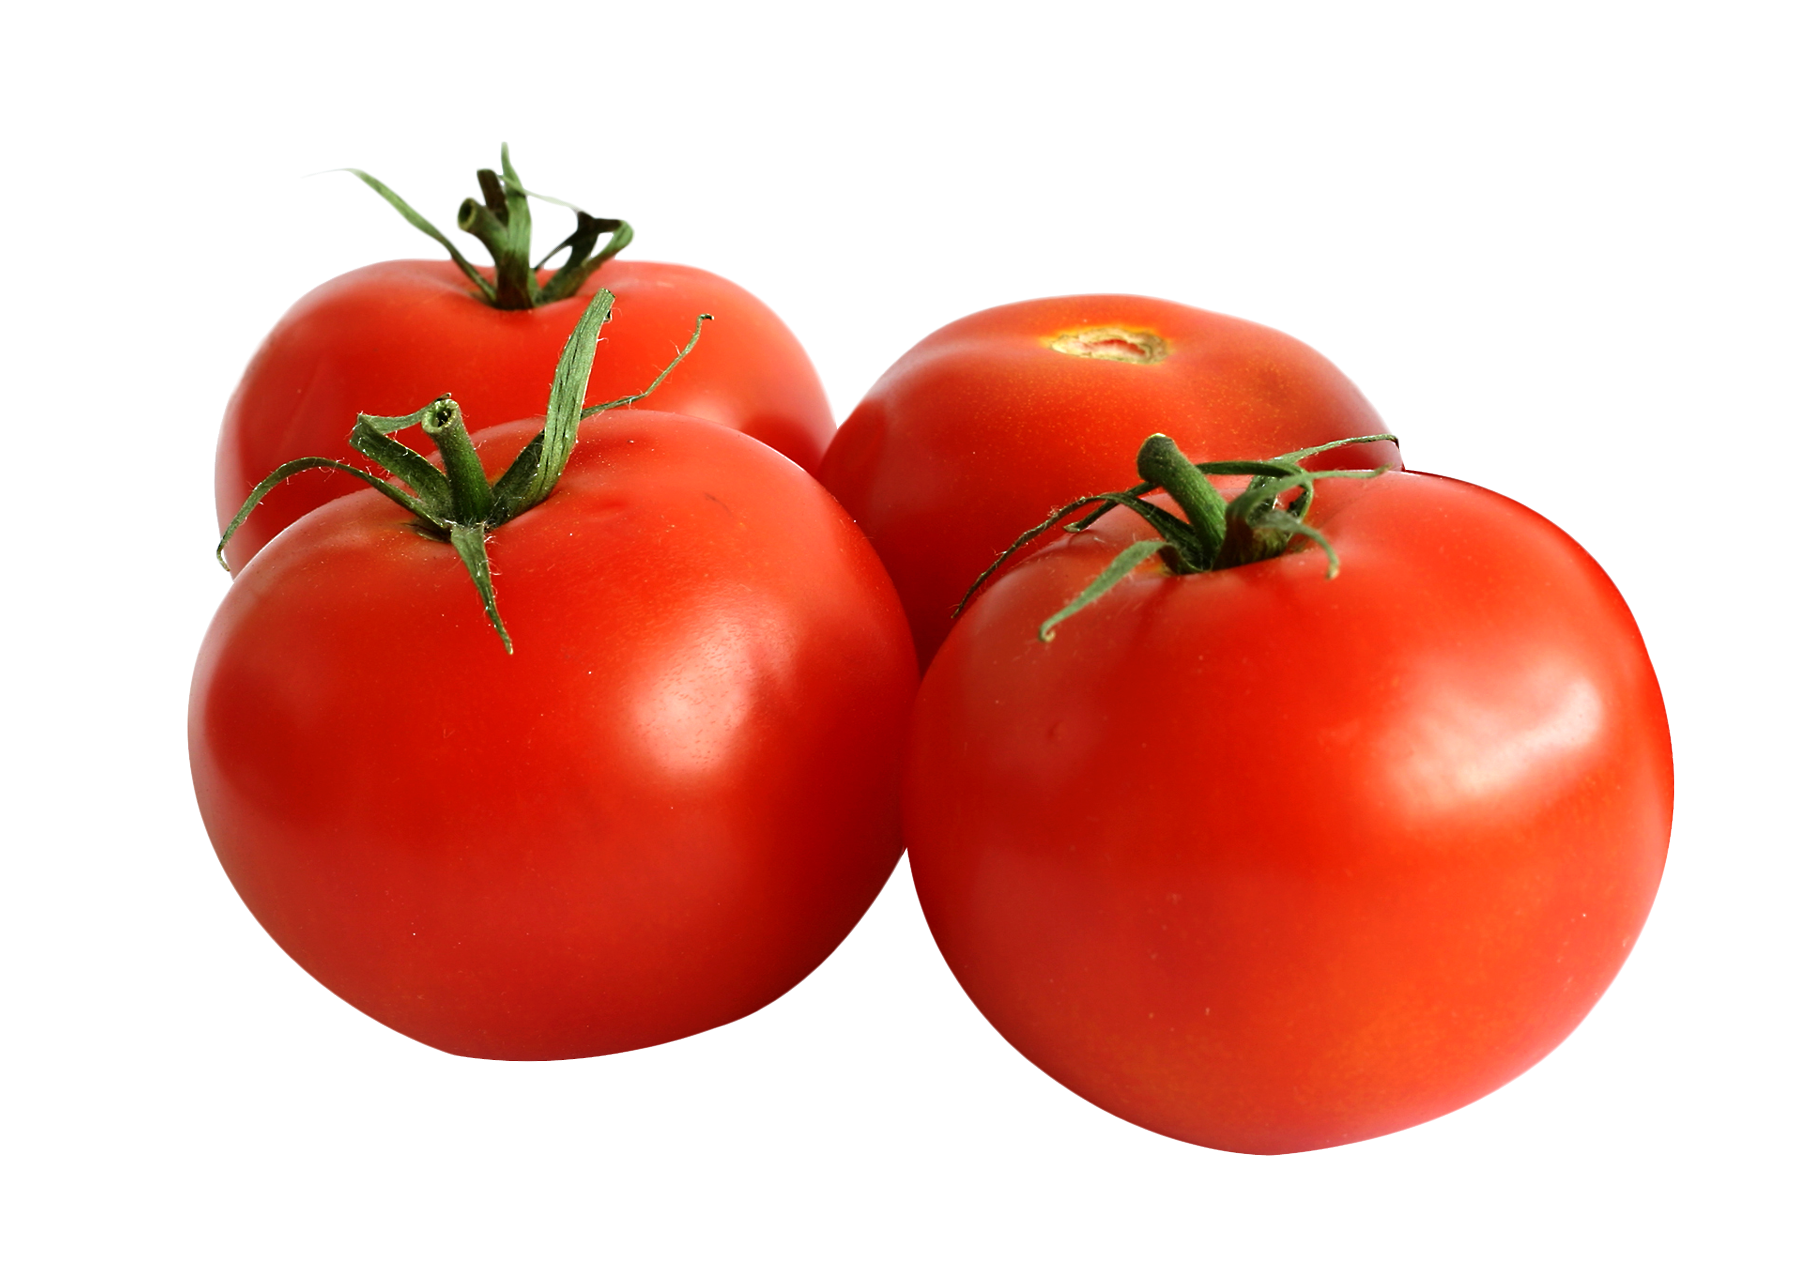 Tomato PNG Image in High Definition #96614 1810x1264 Pixel | pngteam.com